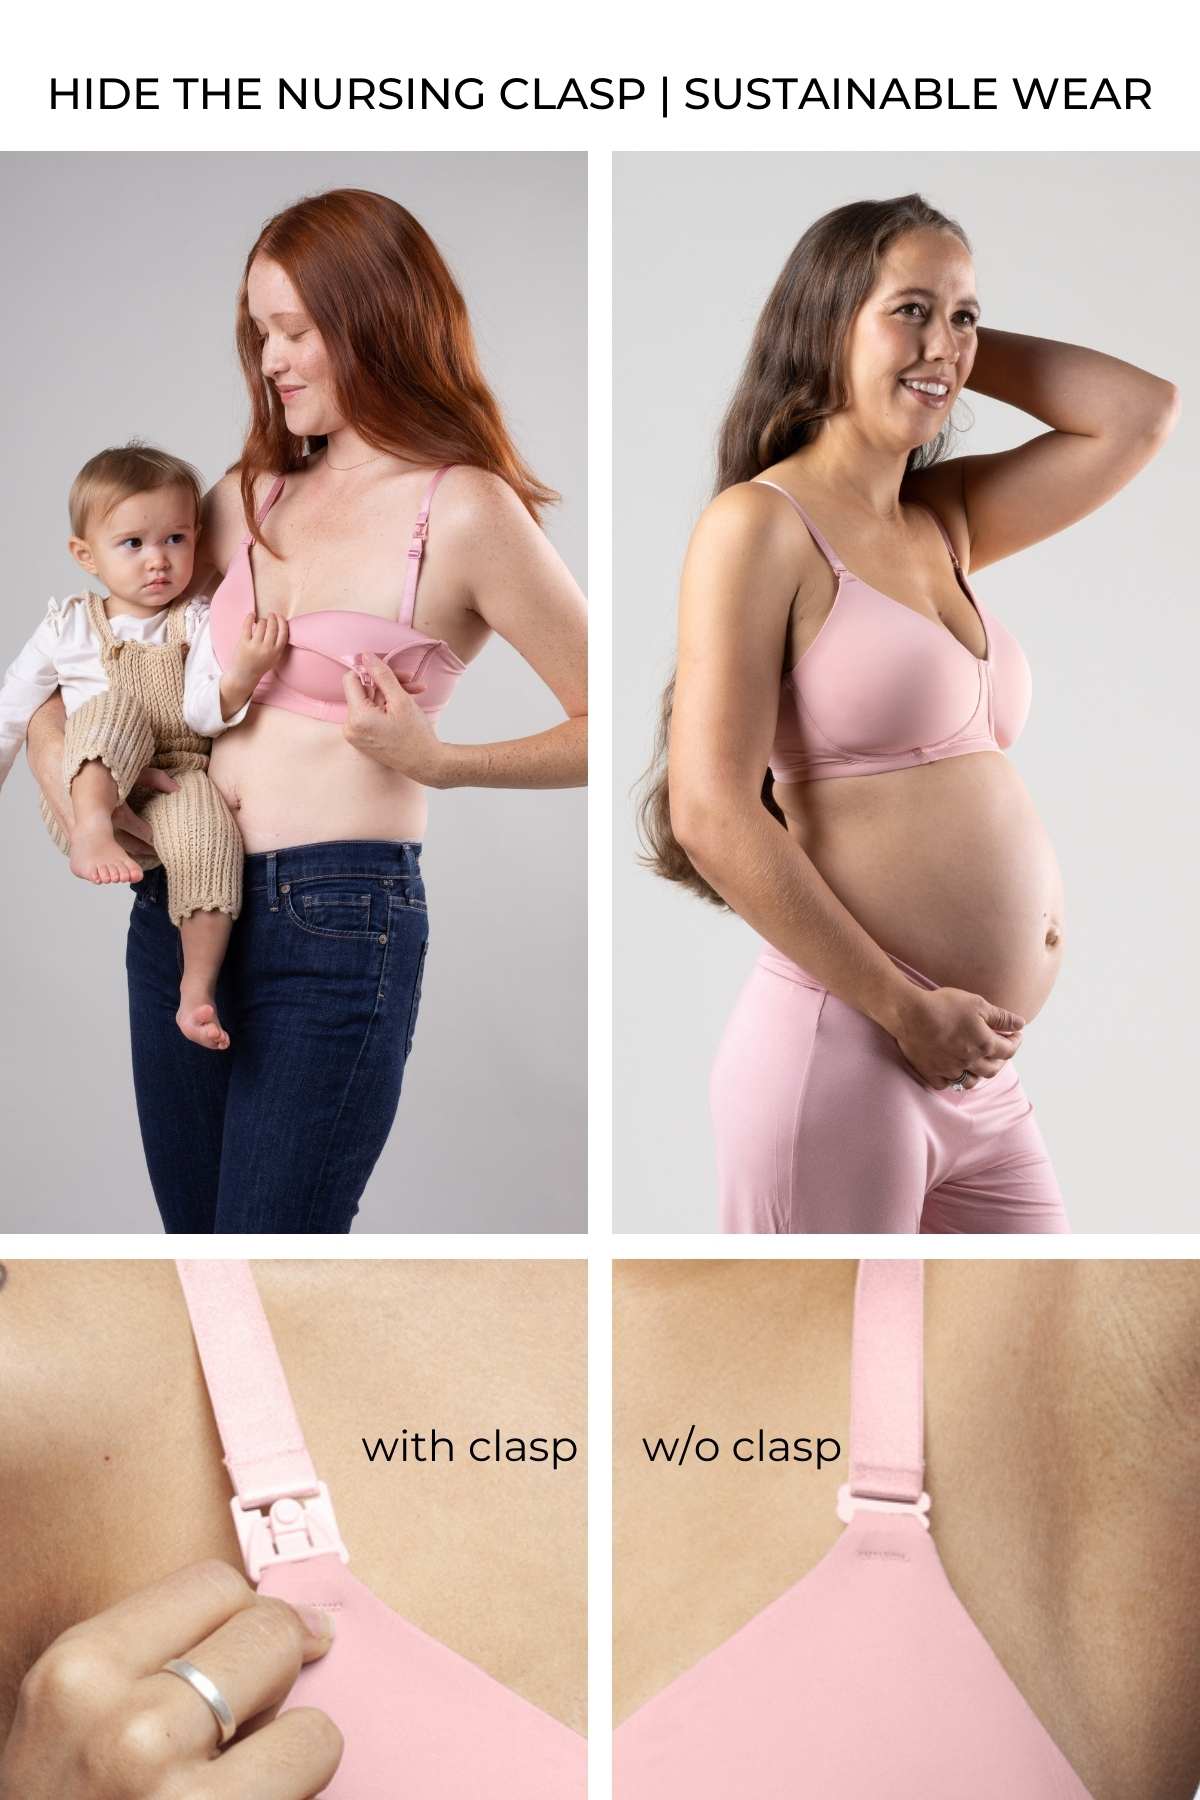 Infographic showing side by side images of a pregnant woman and a breastfeeding woman to highlight the ability to hide the nursing claps in the Undercover Nursing T-Shirt Bra in color Rose Pink. Also zoom images showing with and without the nursing clasp at the top of each bra cup.